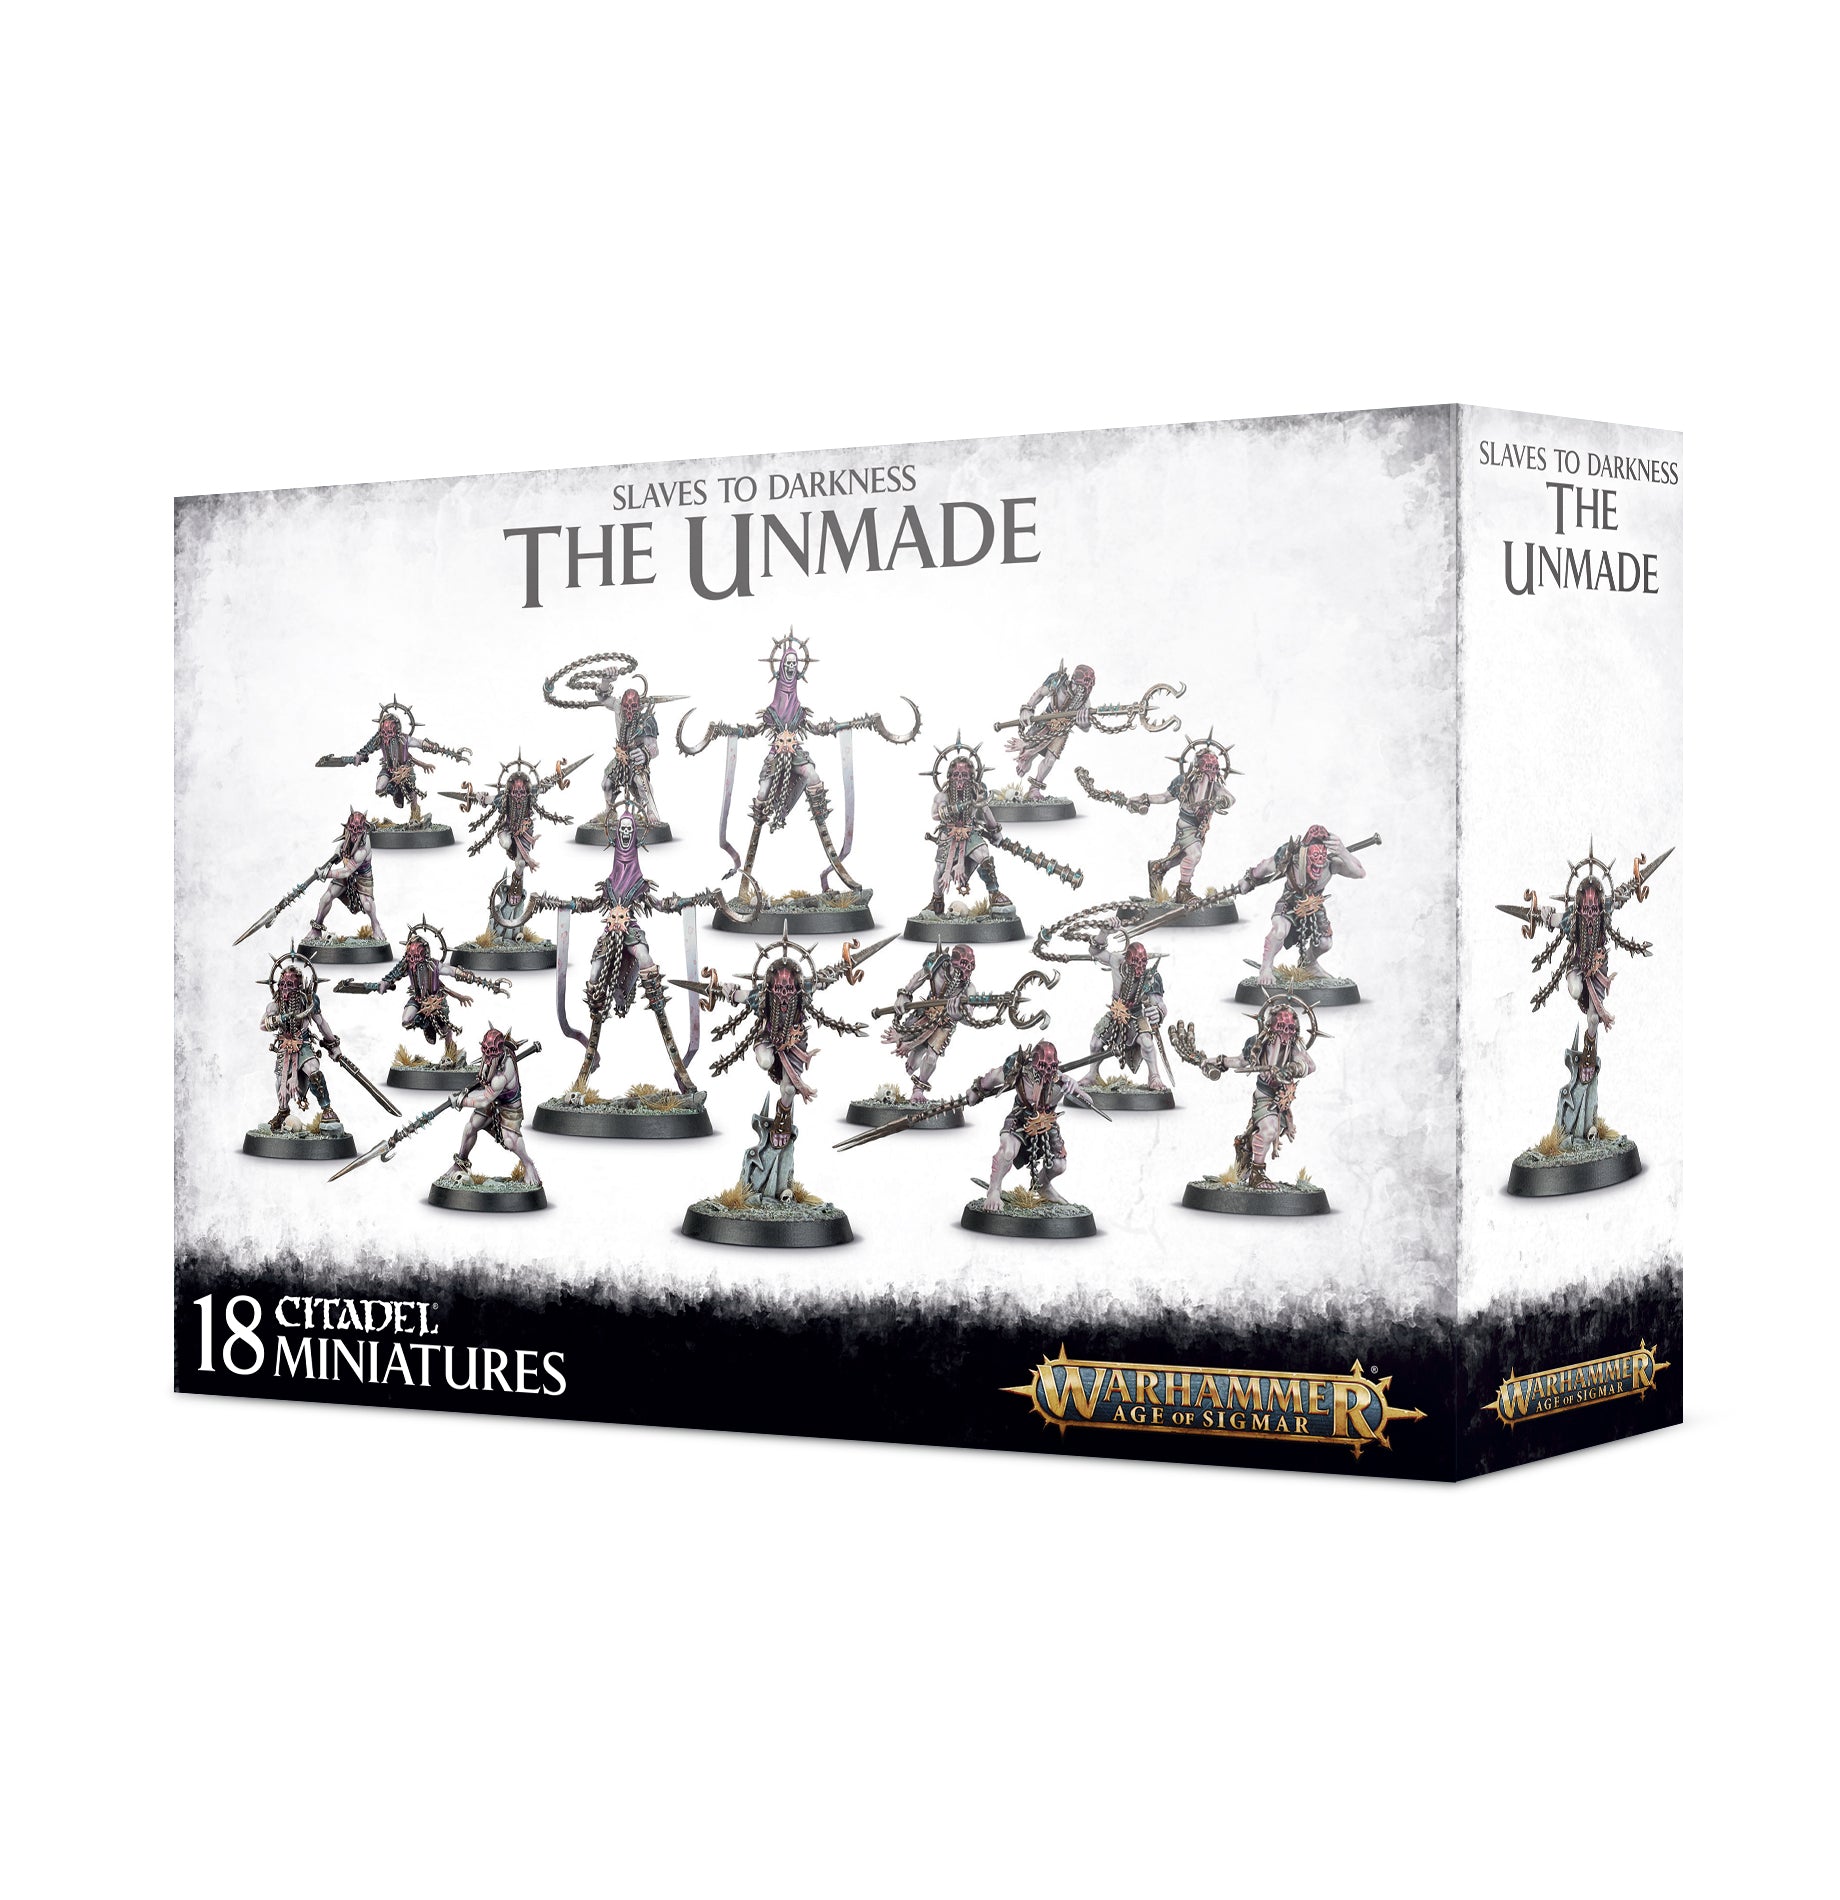 AOS SLAVES TO DARKNESS - THE UNMADE | BD Cosmos